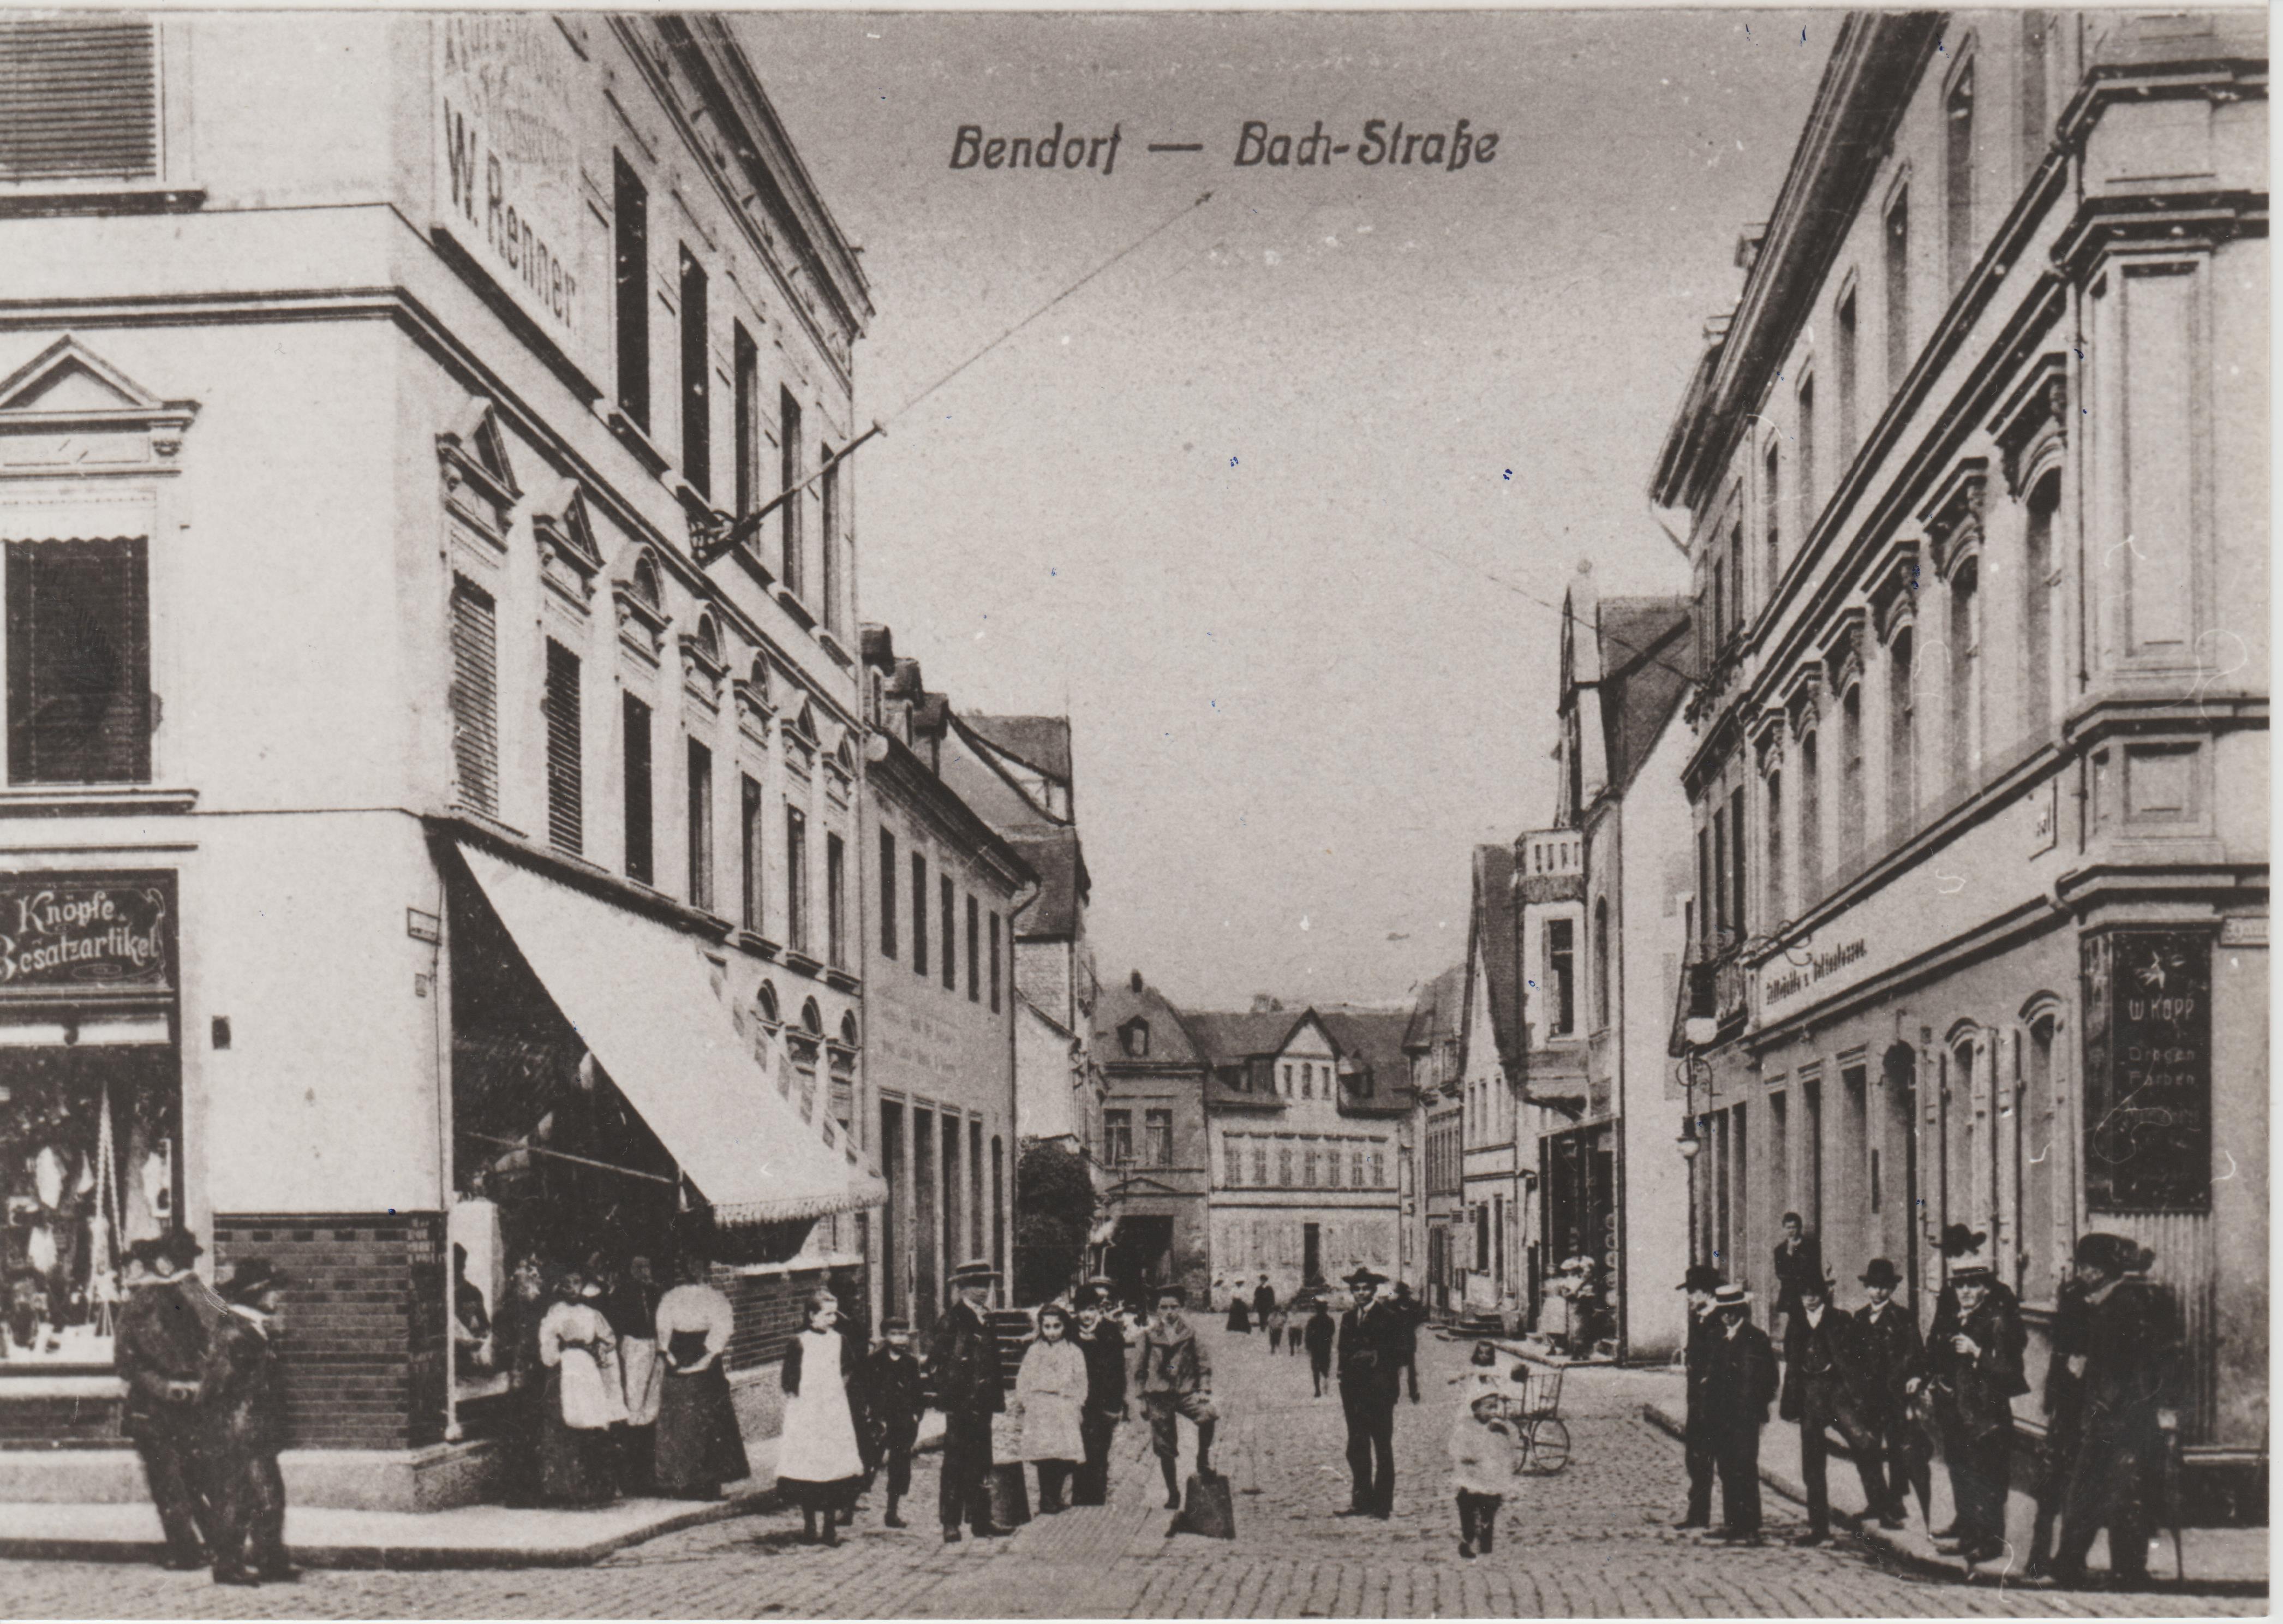 Mittlere Bachstrasse in Bendorf um 1907 (REM CC BY-NC-SA)